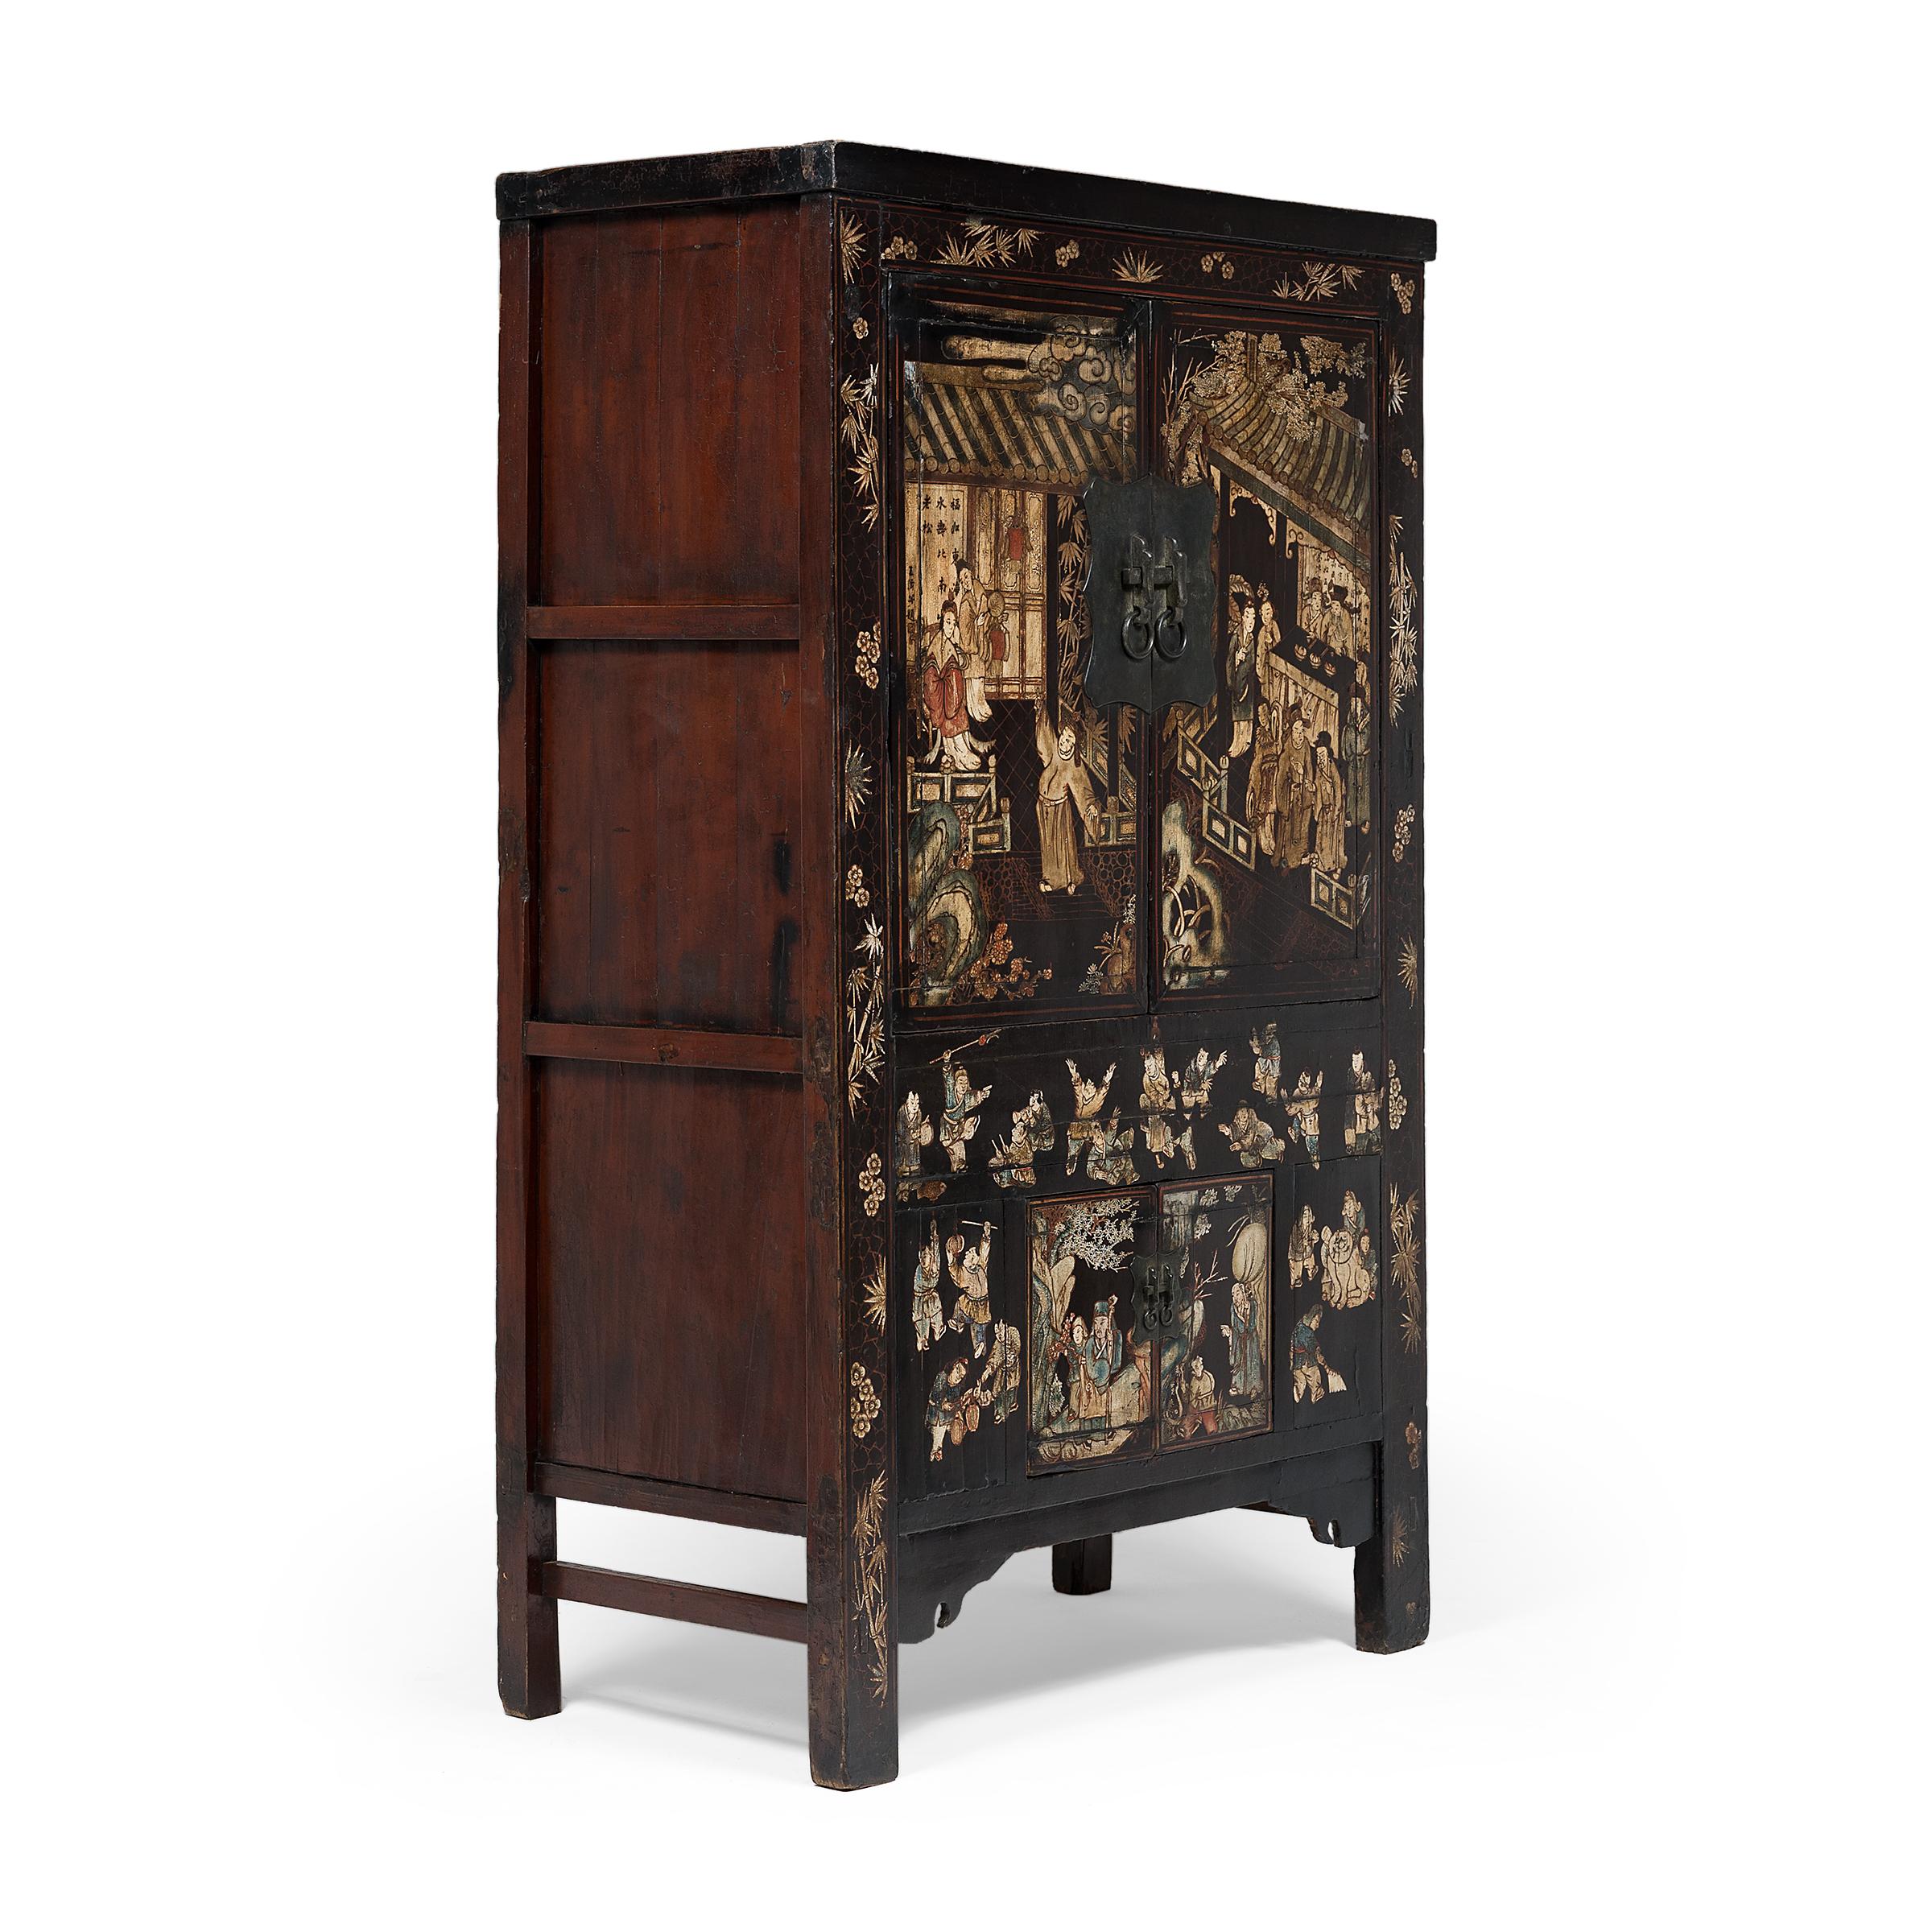 Constructed with four doors, this spectacular Qing-dynasty cabinet from the mid-19th century is lavishly painted with scenes of courtly life in a grand palace garden. Seamlessly constructed and darkly lacquered, the tall cabinet provides the perfect